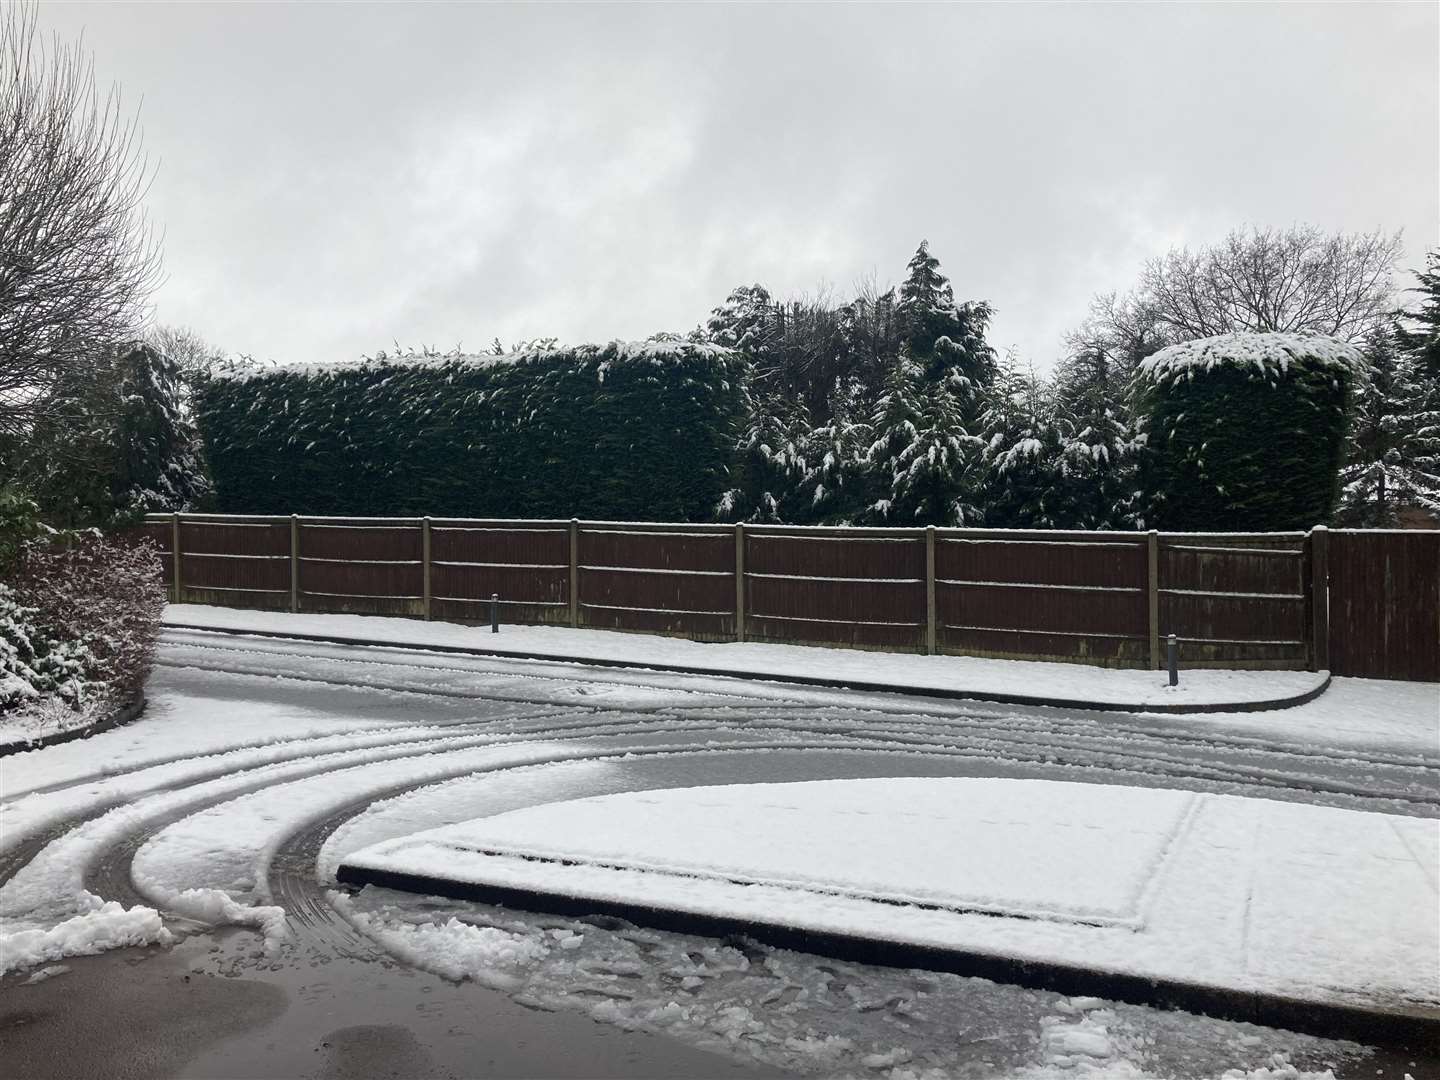 Snow and icy conditions have set in across parts of Kent